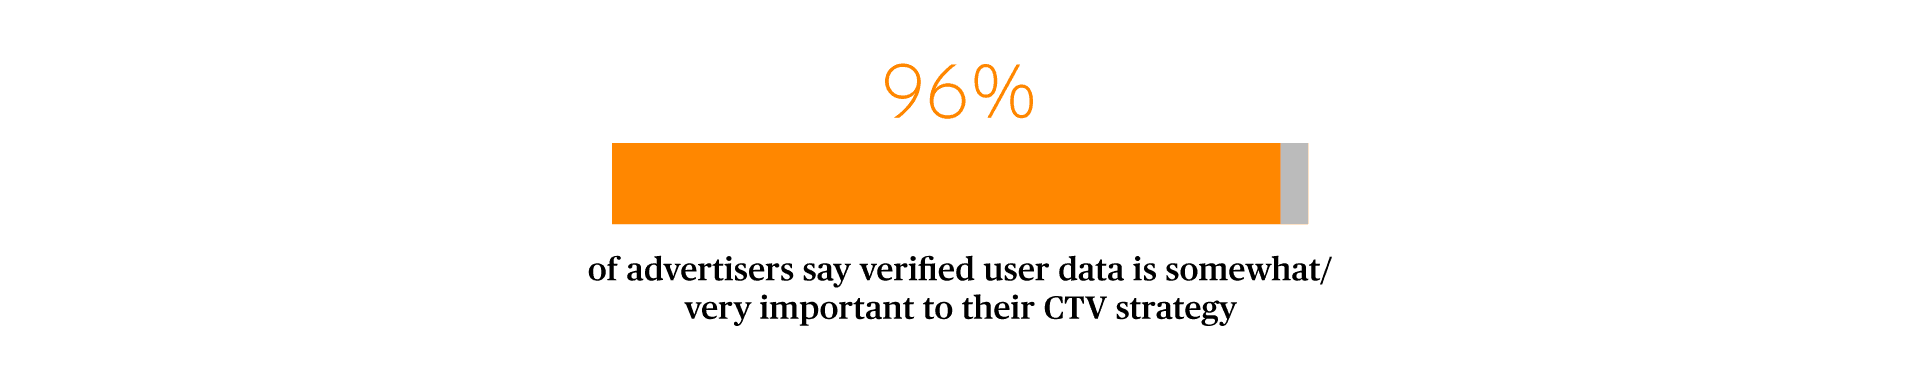 Data visualization displaying 96% of advertisers say verified user data is important to their CTV strategy